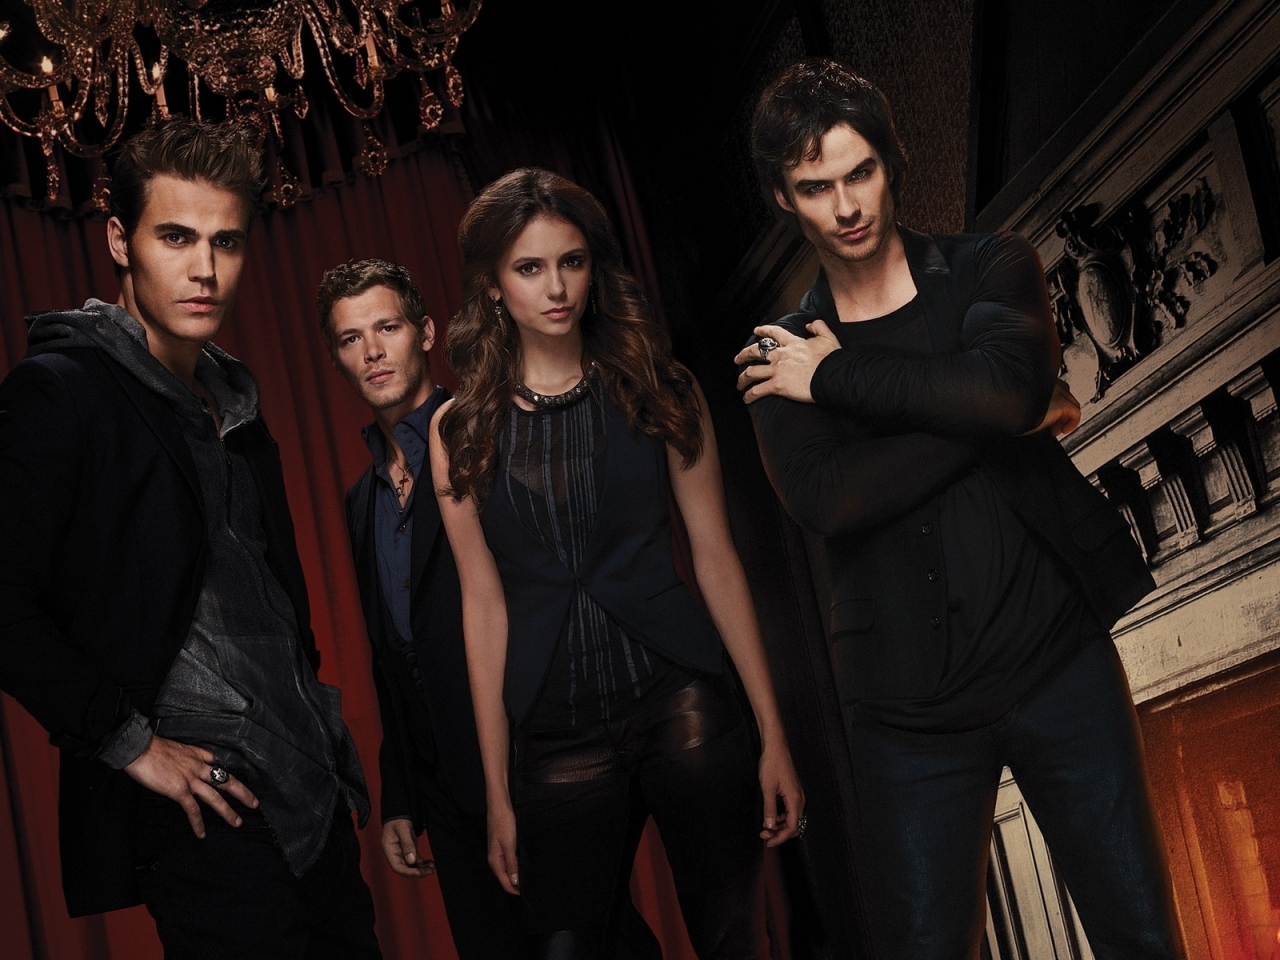 The Vampire Diaries Actors for 1280 x 960 resolution